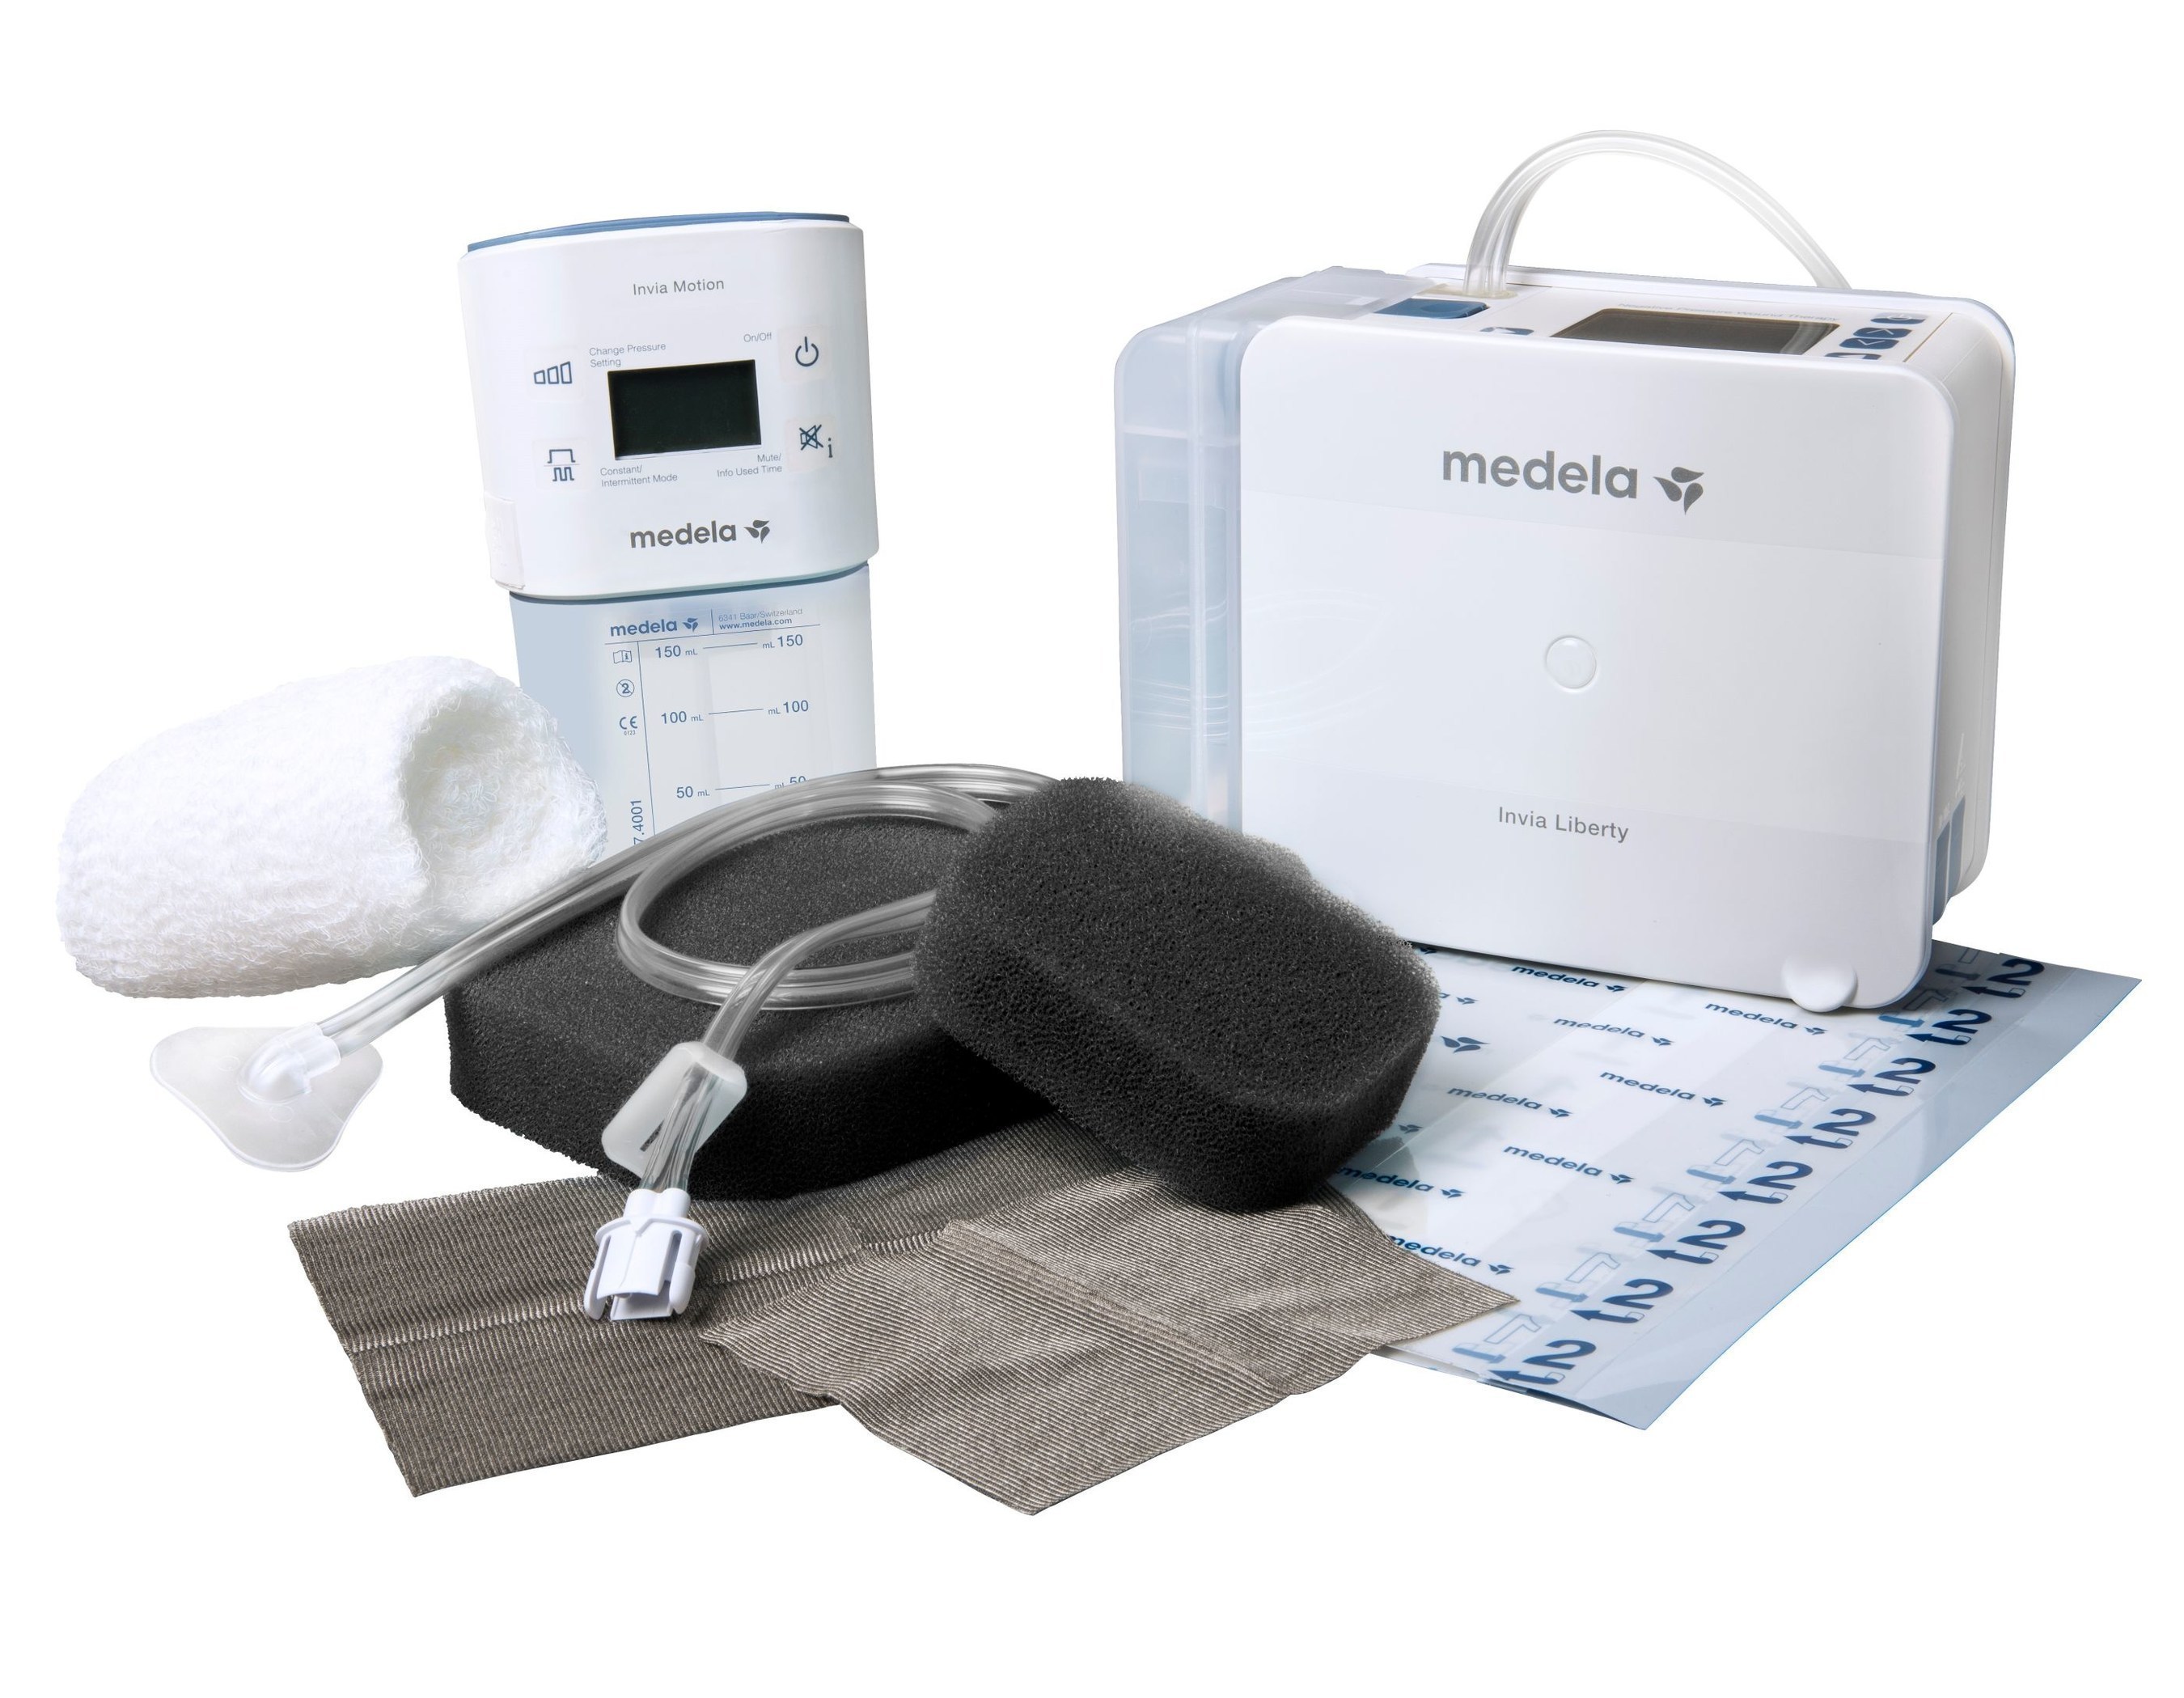 Medela's Invia(R) LibertyTM and single-patient-use Invia(R) Motion NPWT systems including dressing kit (PRNewsFoto/Medela AG)